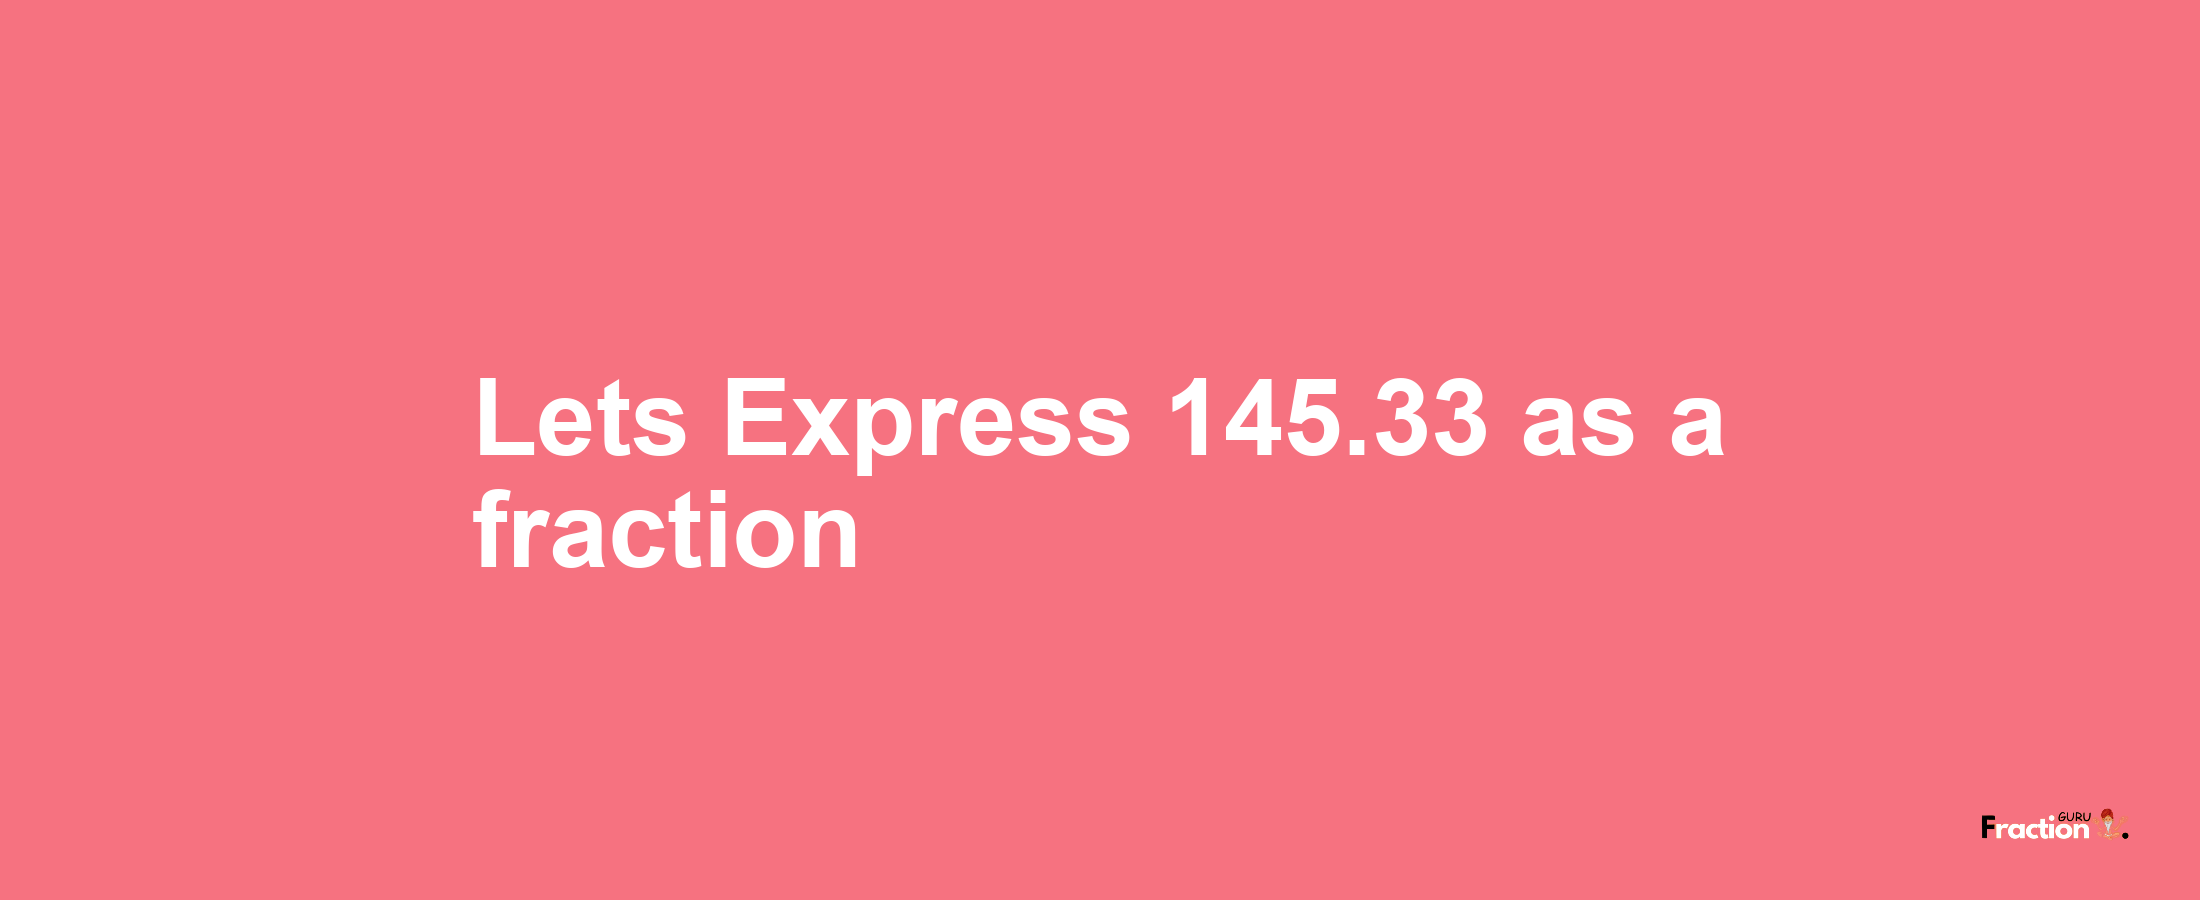 Lets Express 145.33 as afraction